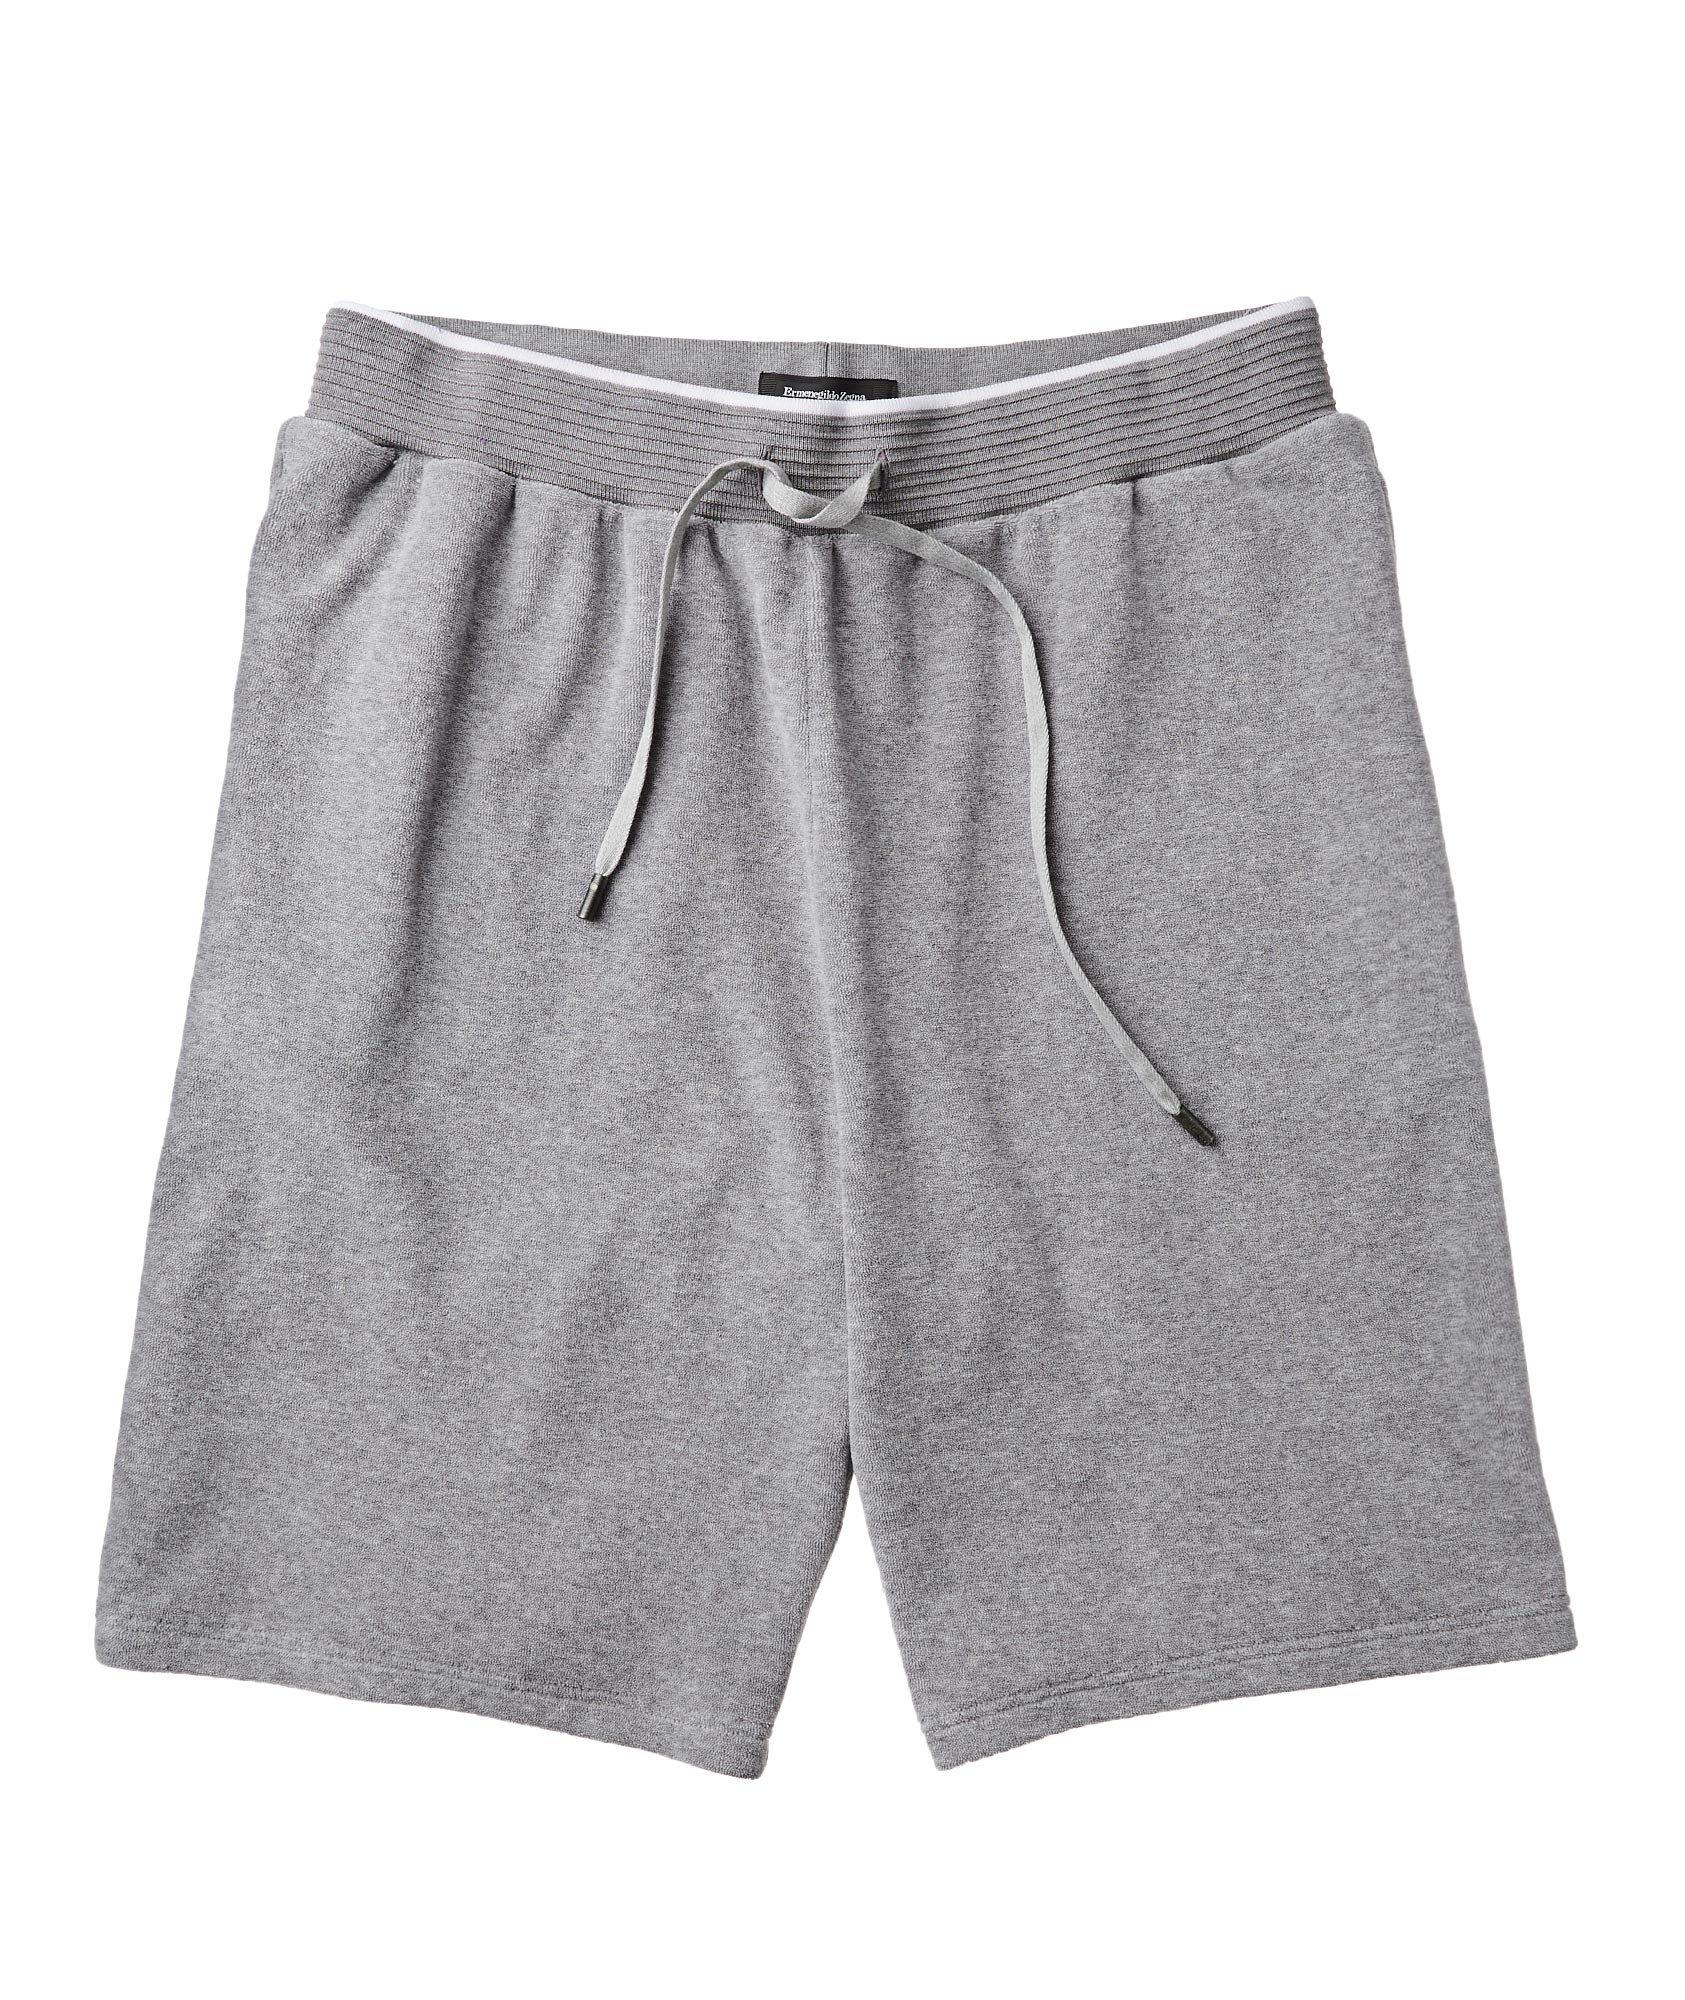 Terry Cloth Shorts image 0